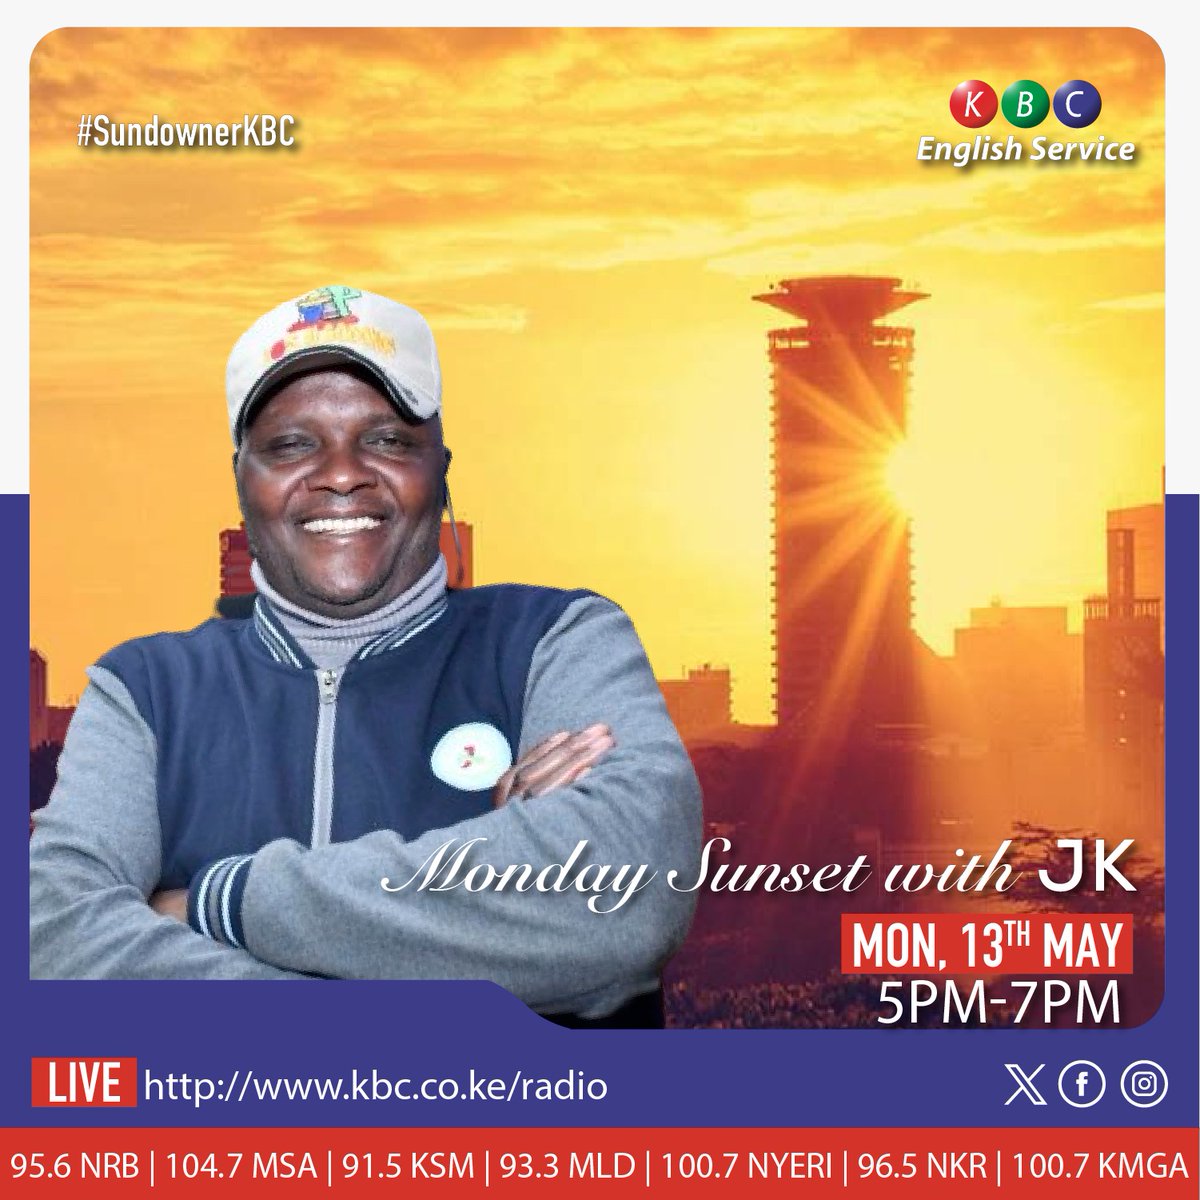 Its what you have been waiting for. Get your favorite drink ready. Its Monday Sunset with Jk 5pm - 7pm. Pin your location @kbcenglish @johnkaranijk . Goodtimes are back. #sundownerkbc